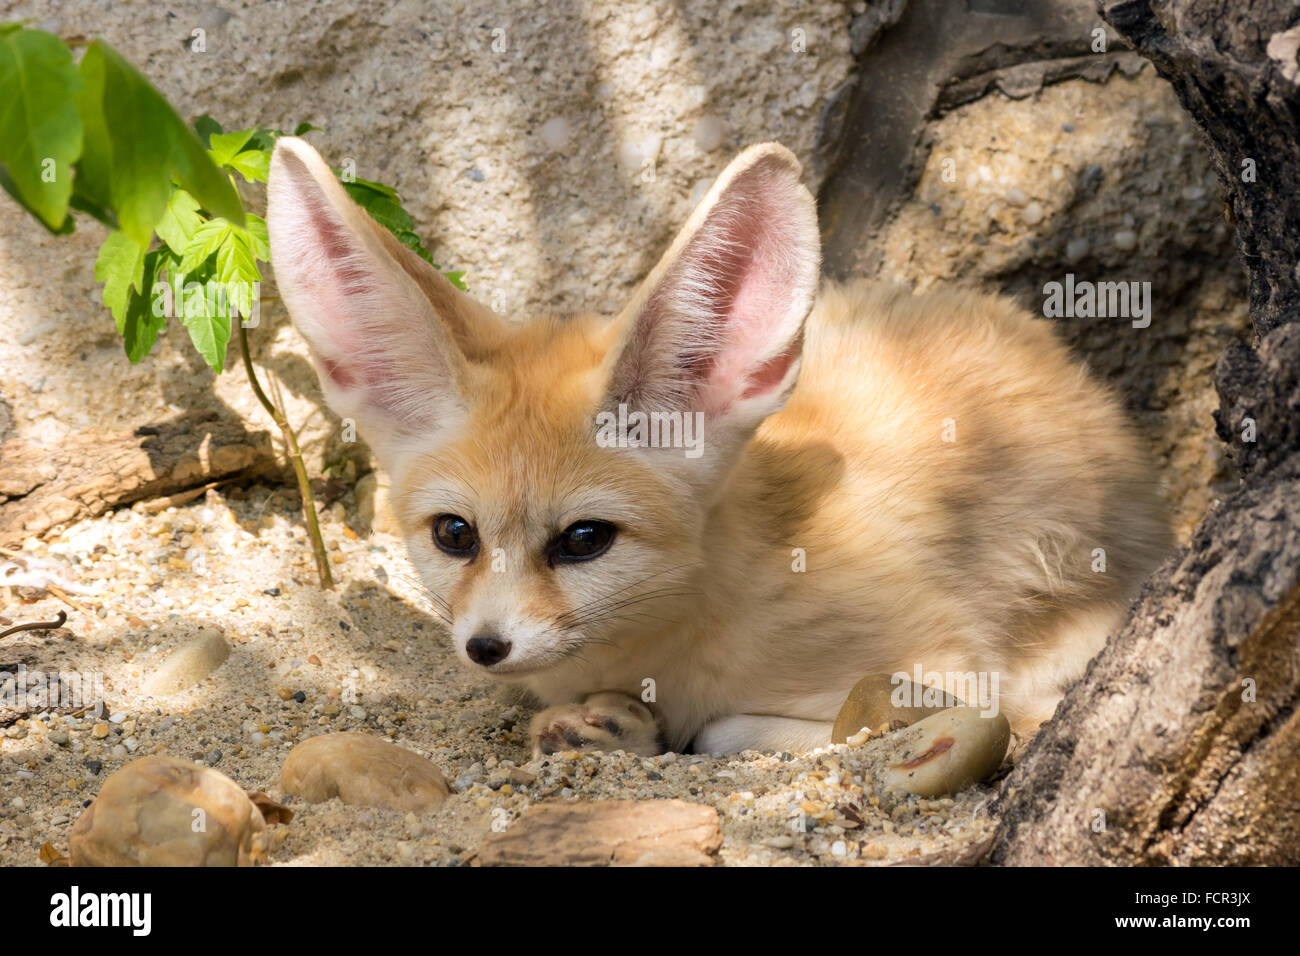 Mobile wallpaper Animal Fennec Fox 956456 download the picture for free